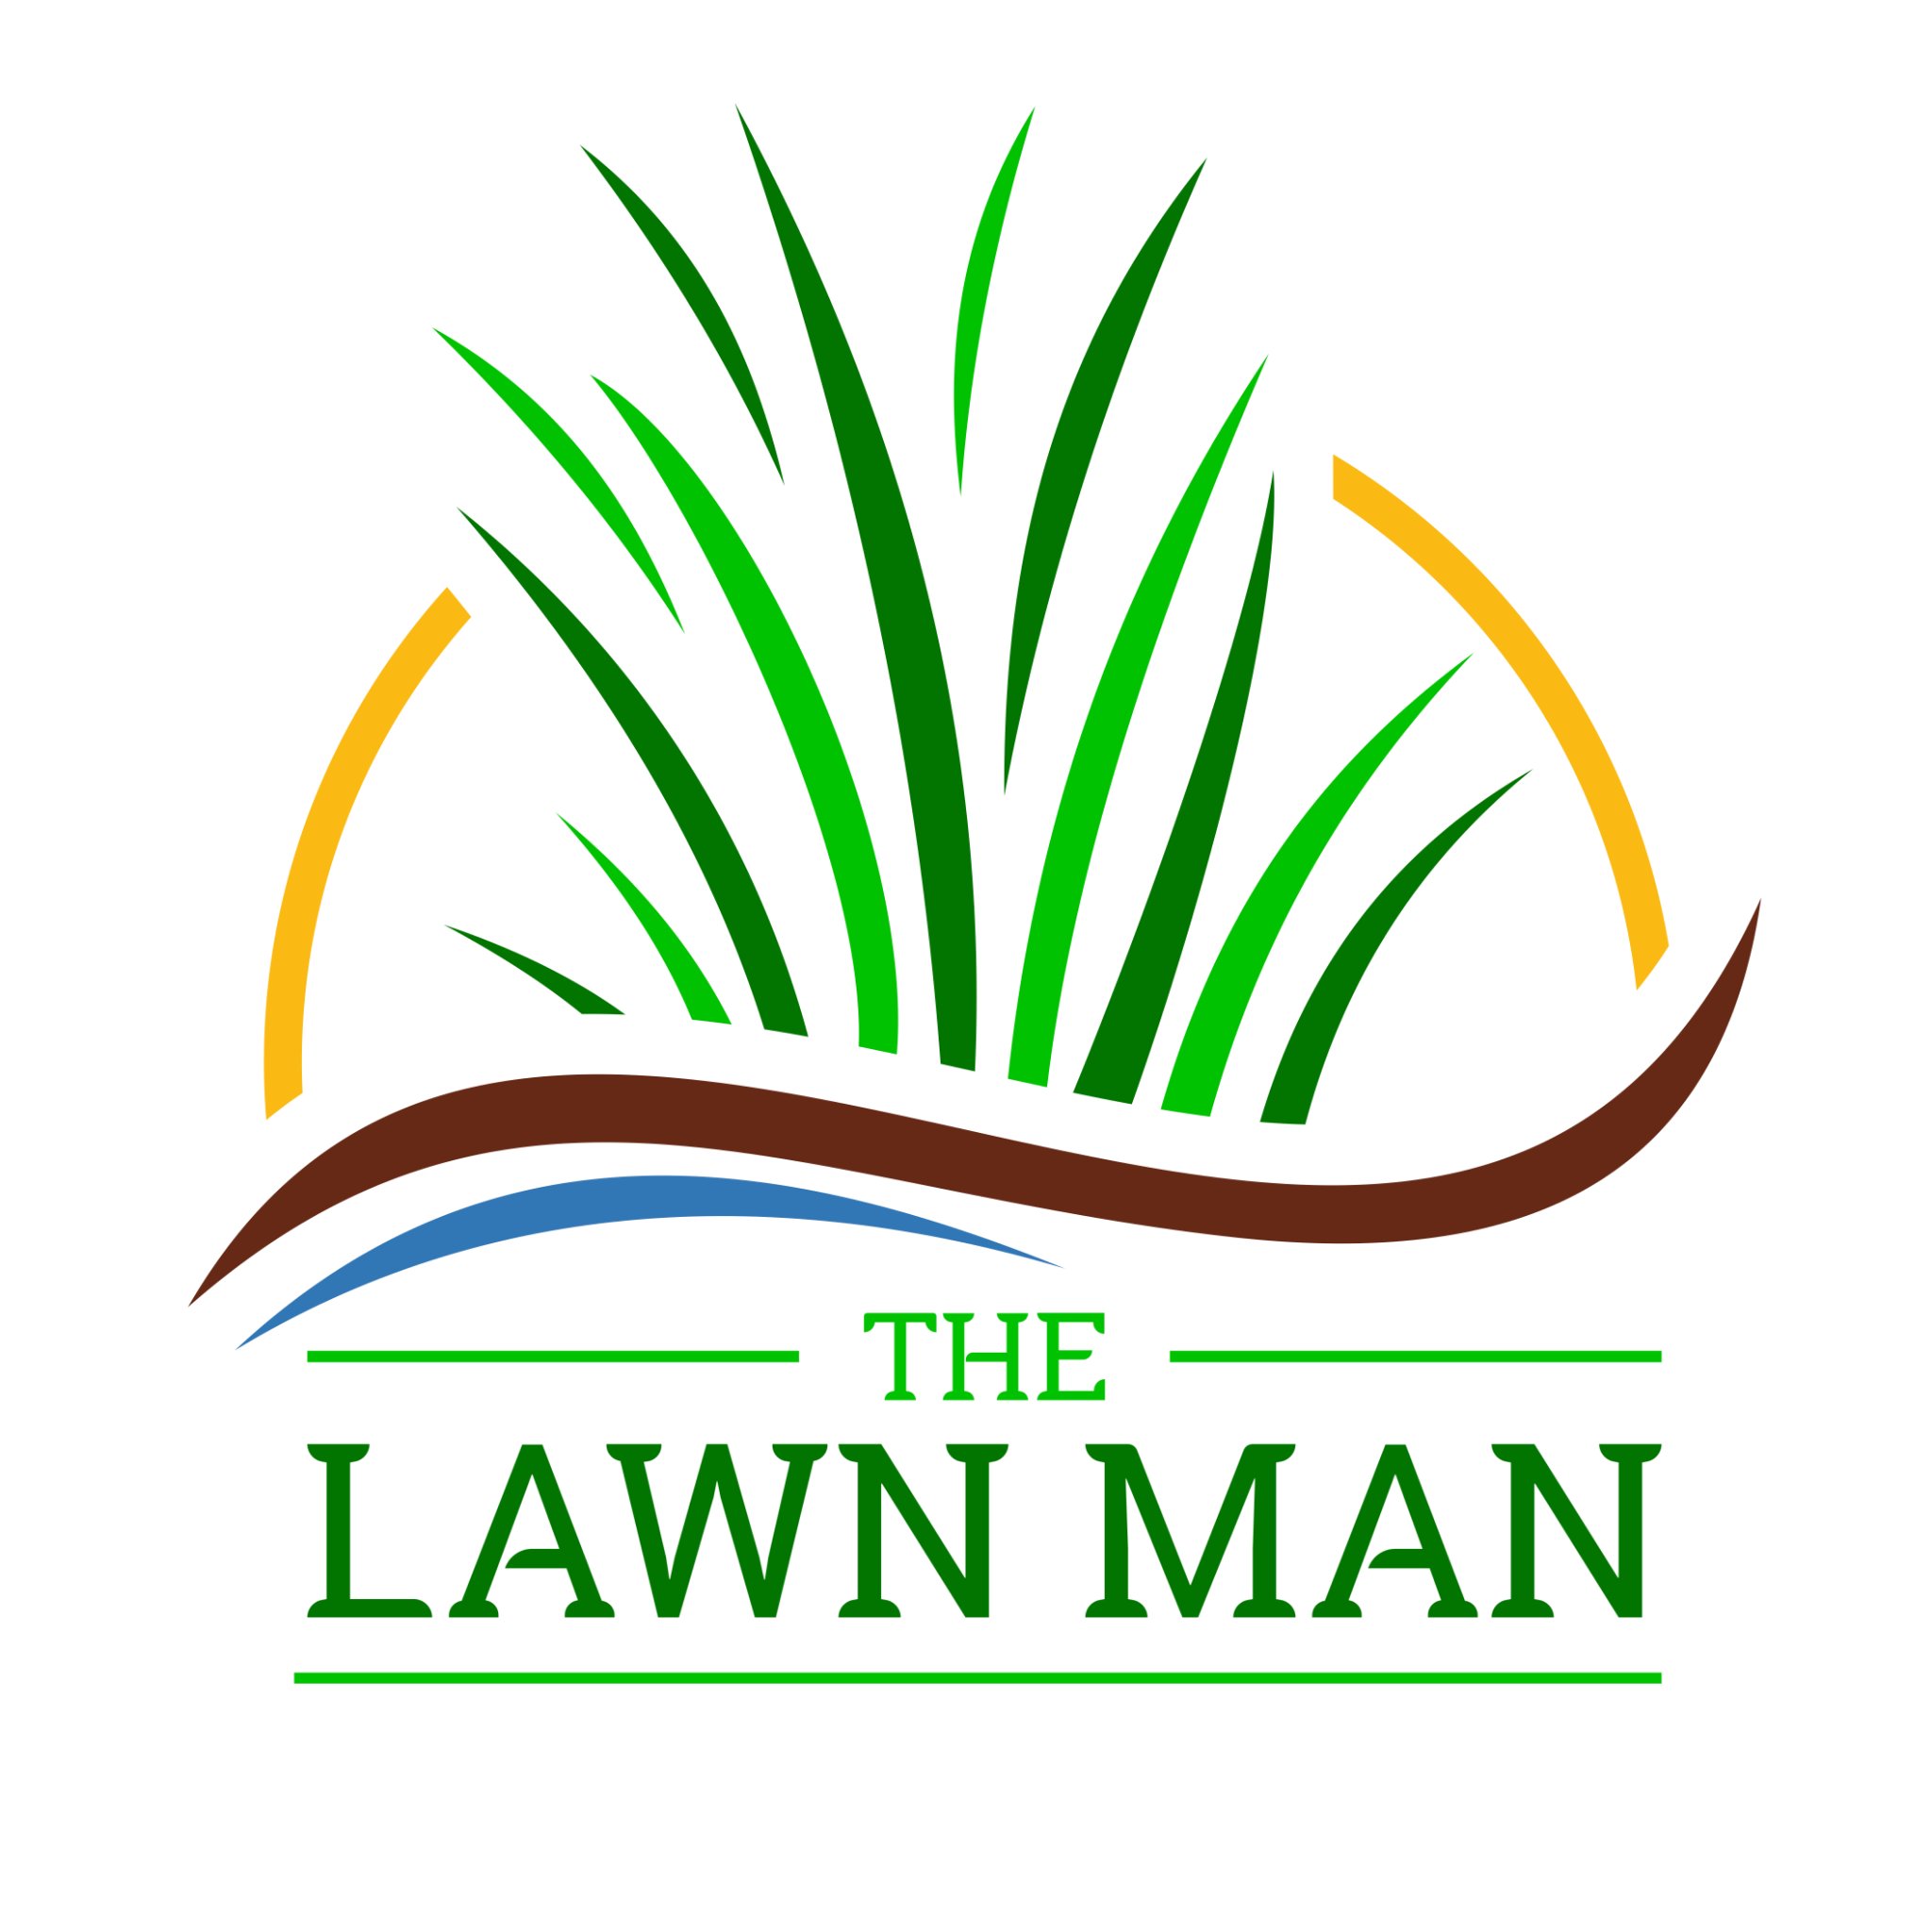 Professional lawn care expert, based in Exeter, UK.